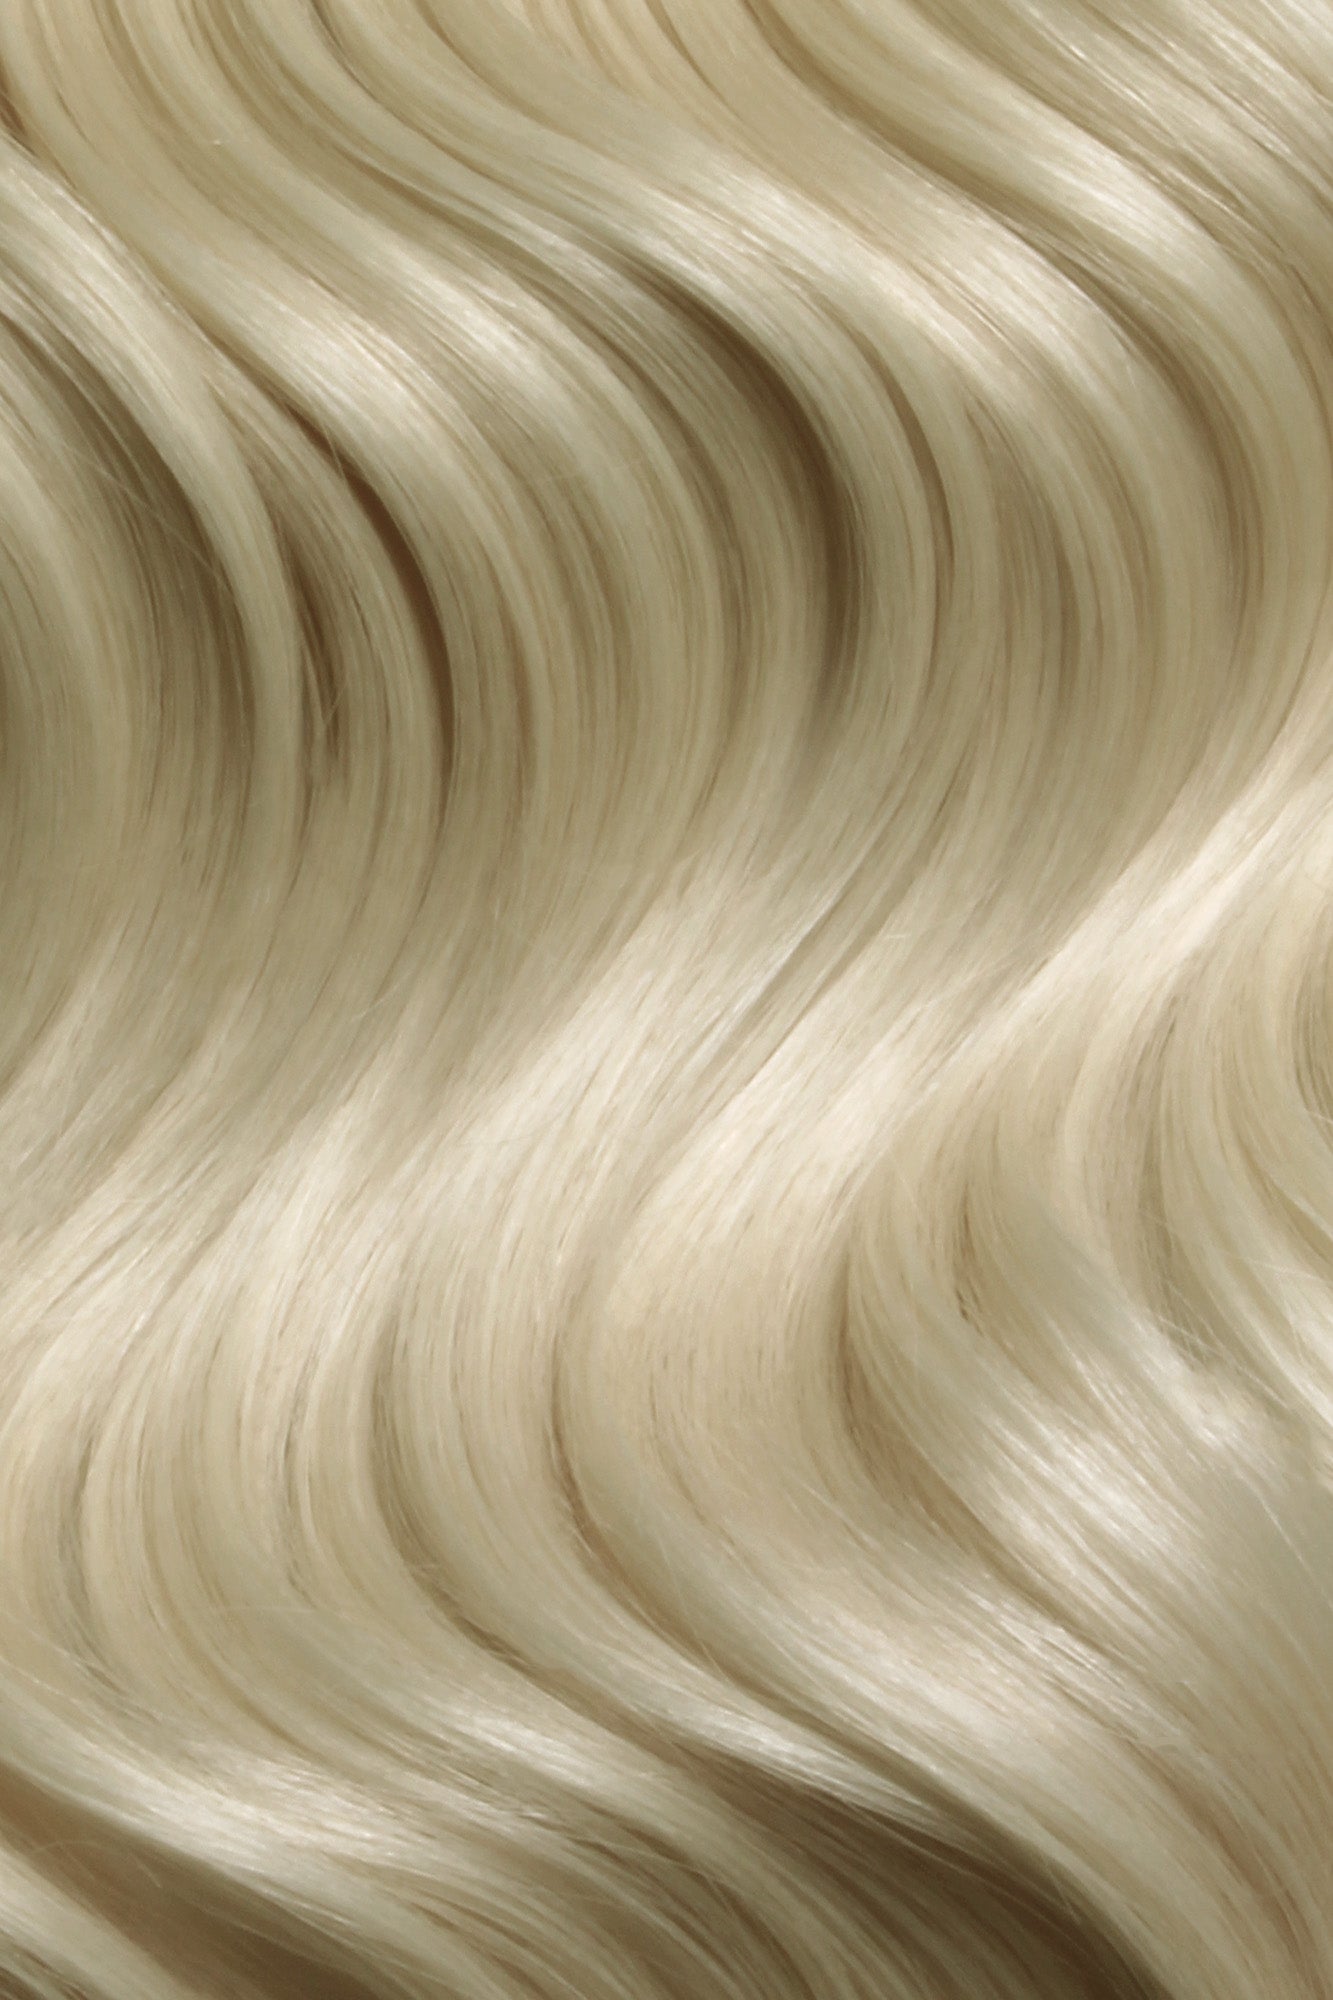 SEAMLESS® Flat Weft 24 Inches - SWAY Hair Extensions Sandy-Blonde-60 Natural SEAMLESS® Flat Weft 24 Inches extensions. Thin, flexible, and discreet. 100% Double Drawn Remy Human Hair. Versatile and reusable